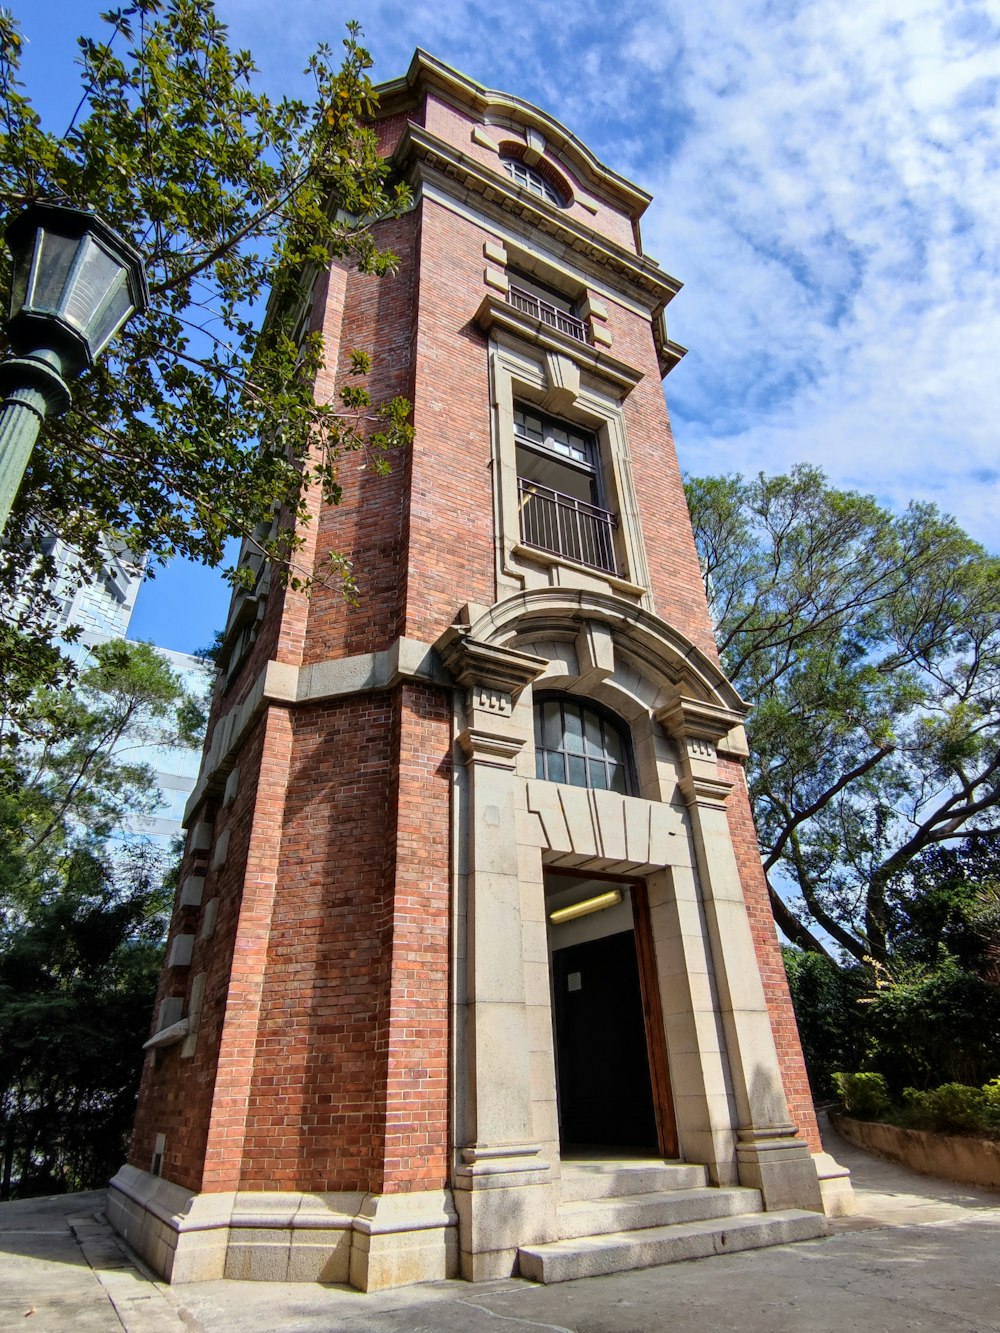 a tall brick tower with a clock on the top of it